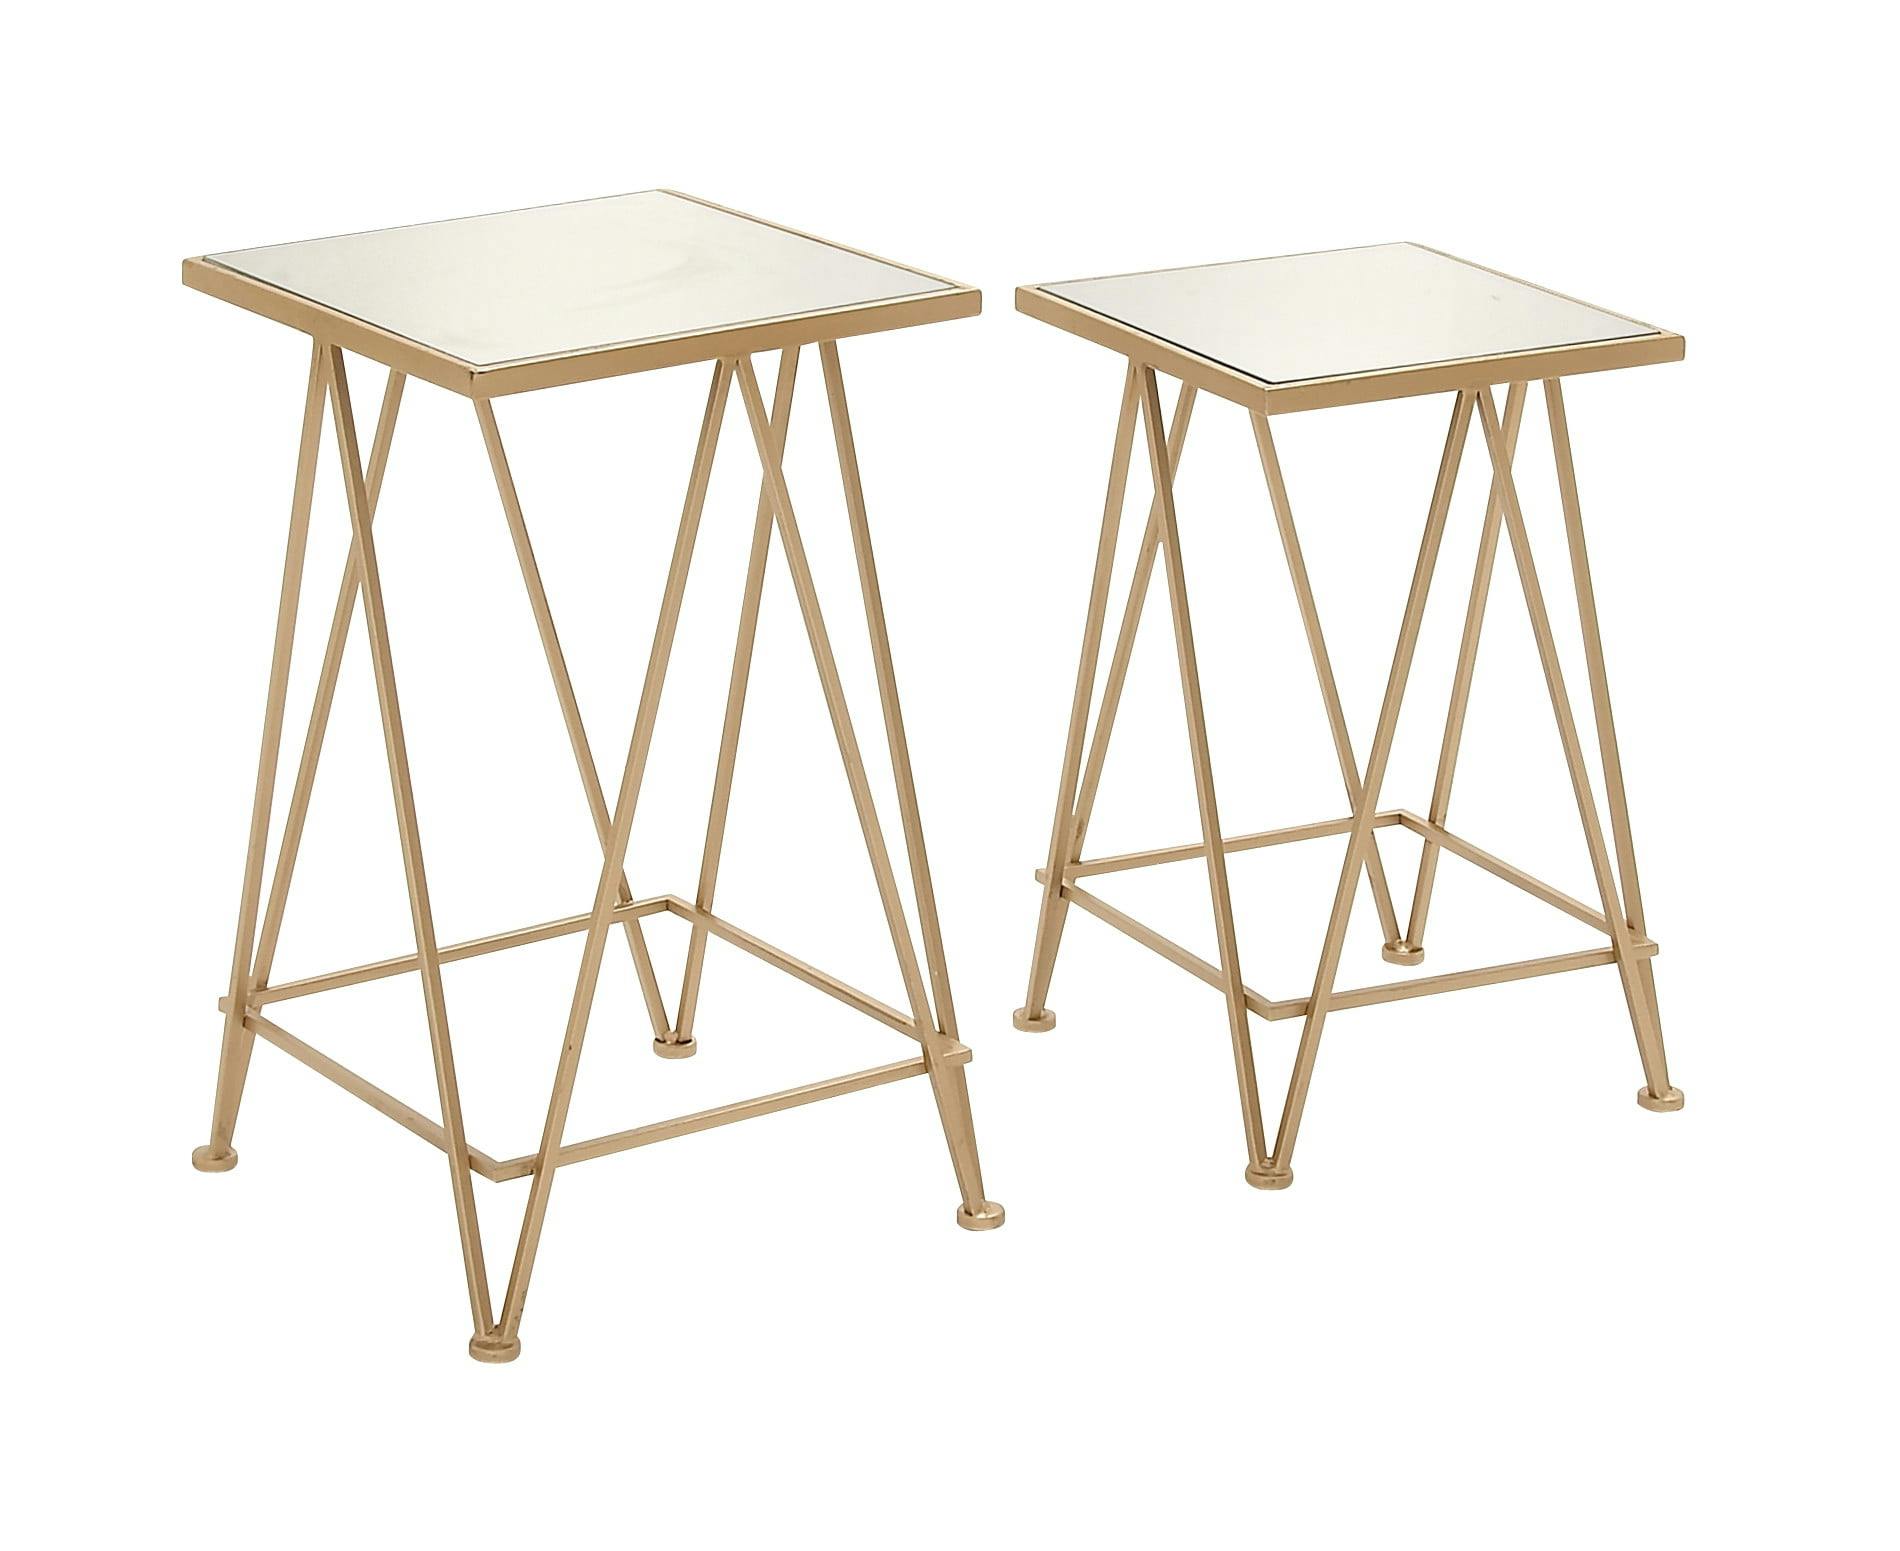 Sleek Gold Metal and Mirrored Glass Square Accent Table Set